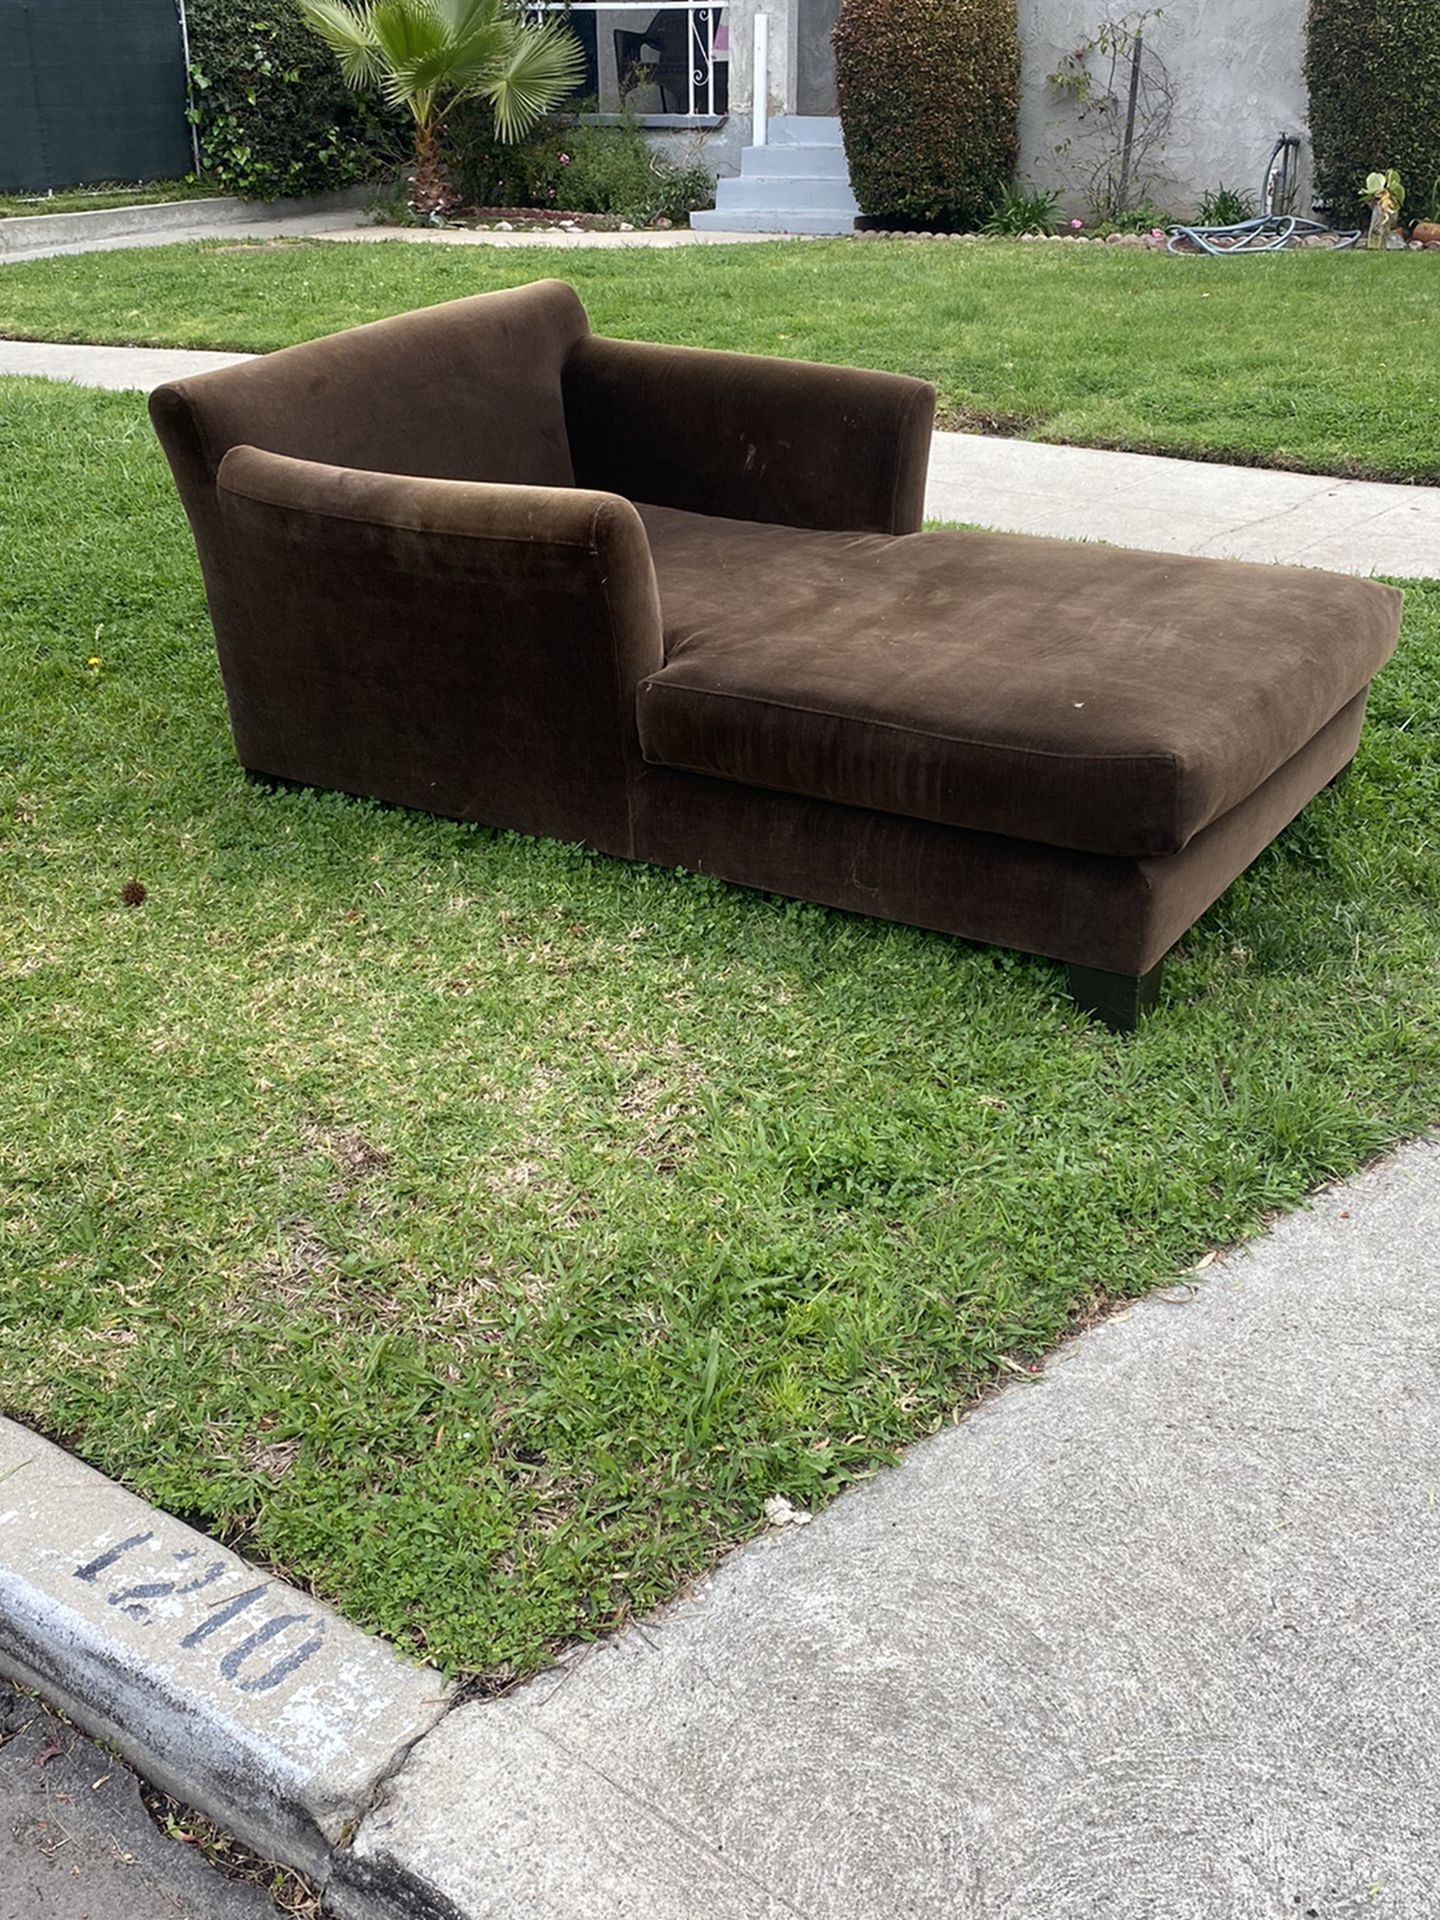 FREE CHAISE LOUNGE